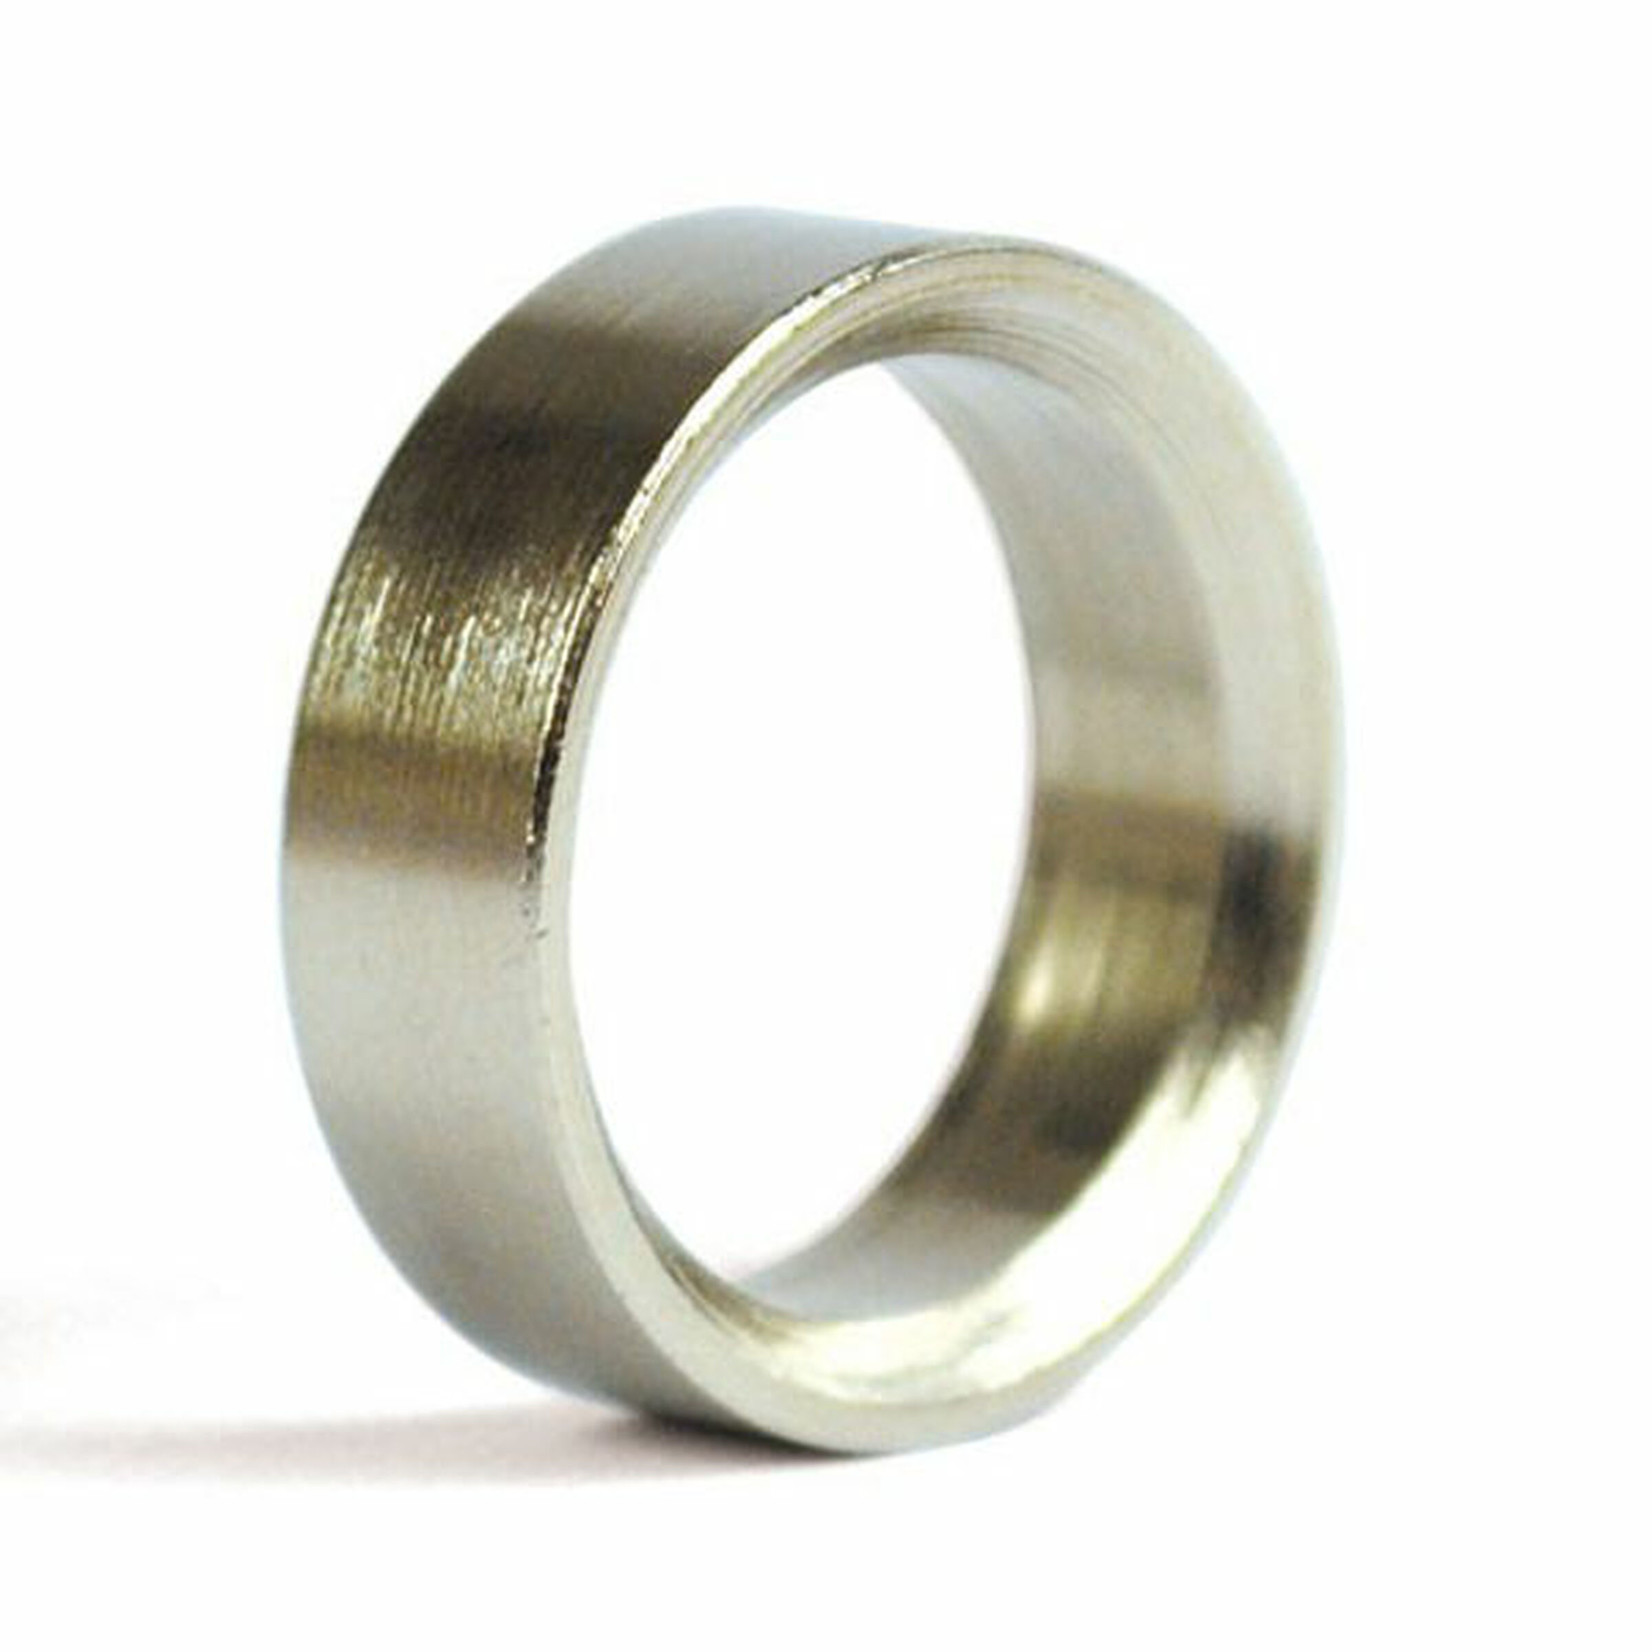 DW DW 7/8 inch OUTER BUSHING FOR HEX SHAFT